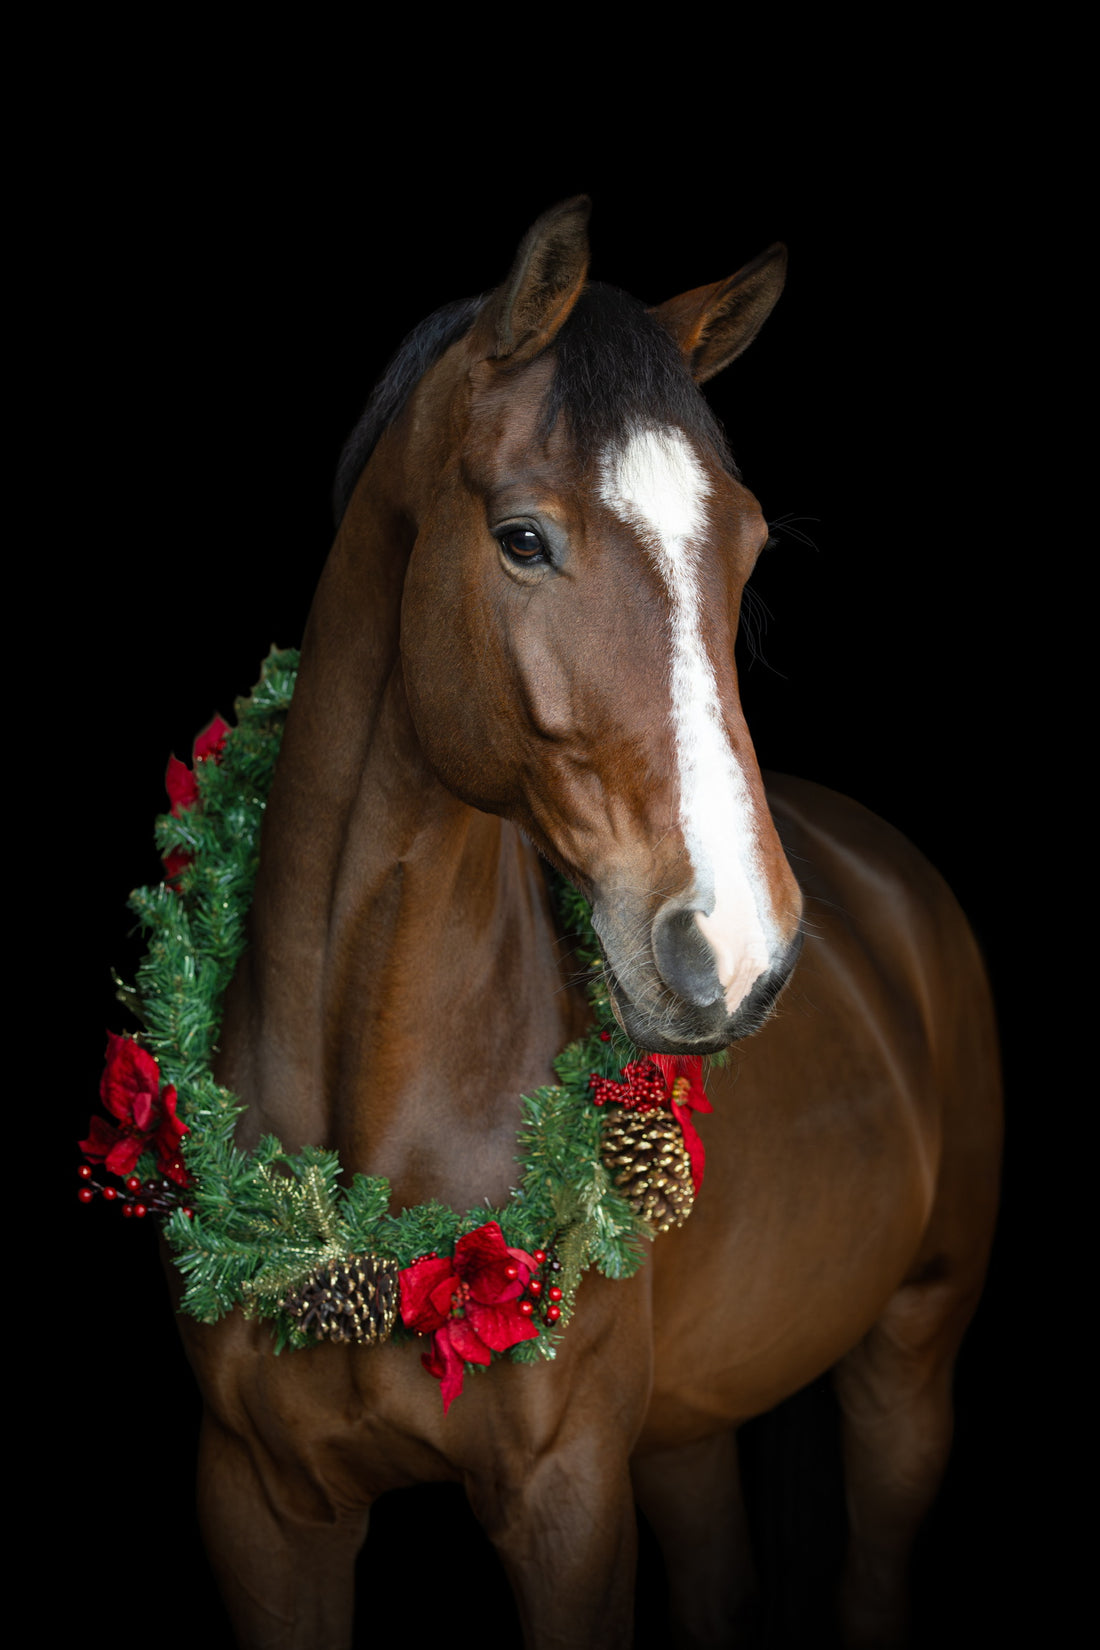 Merry Christmas from Equine 74 !